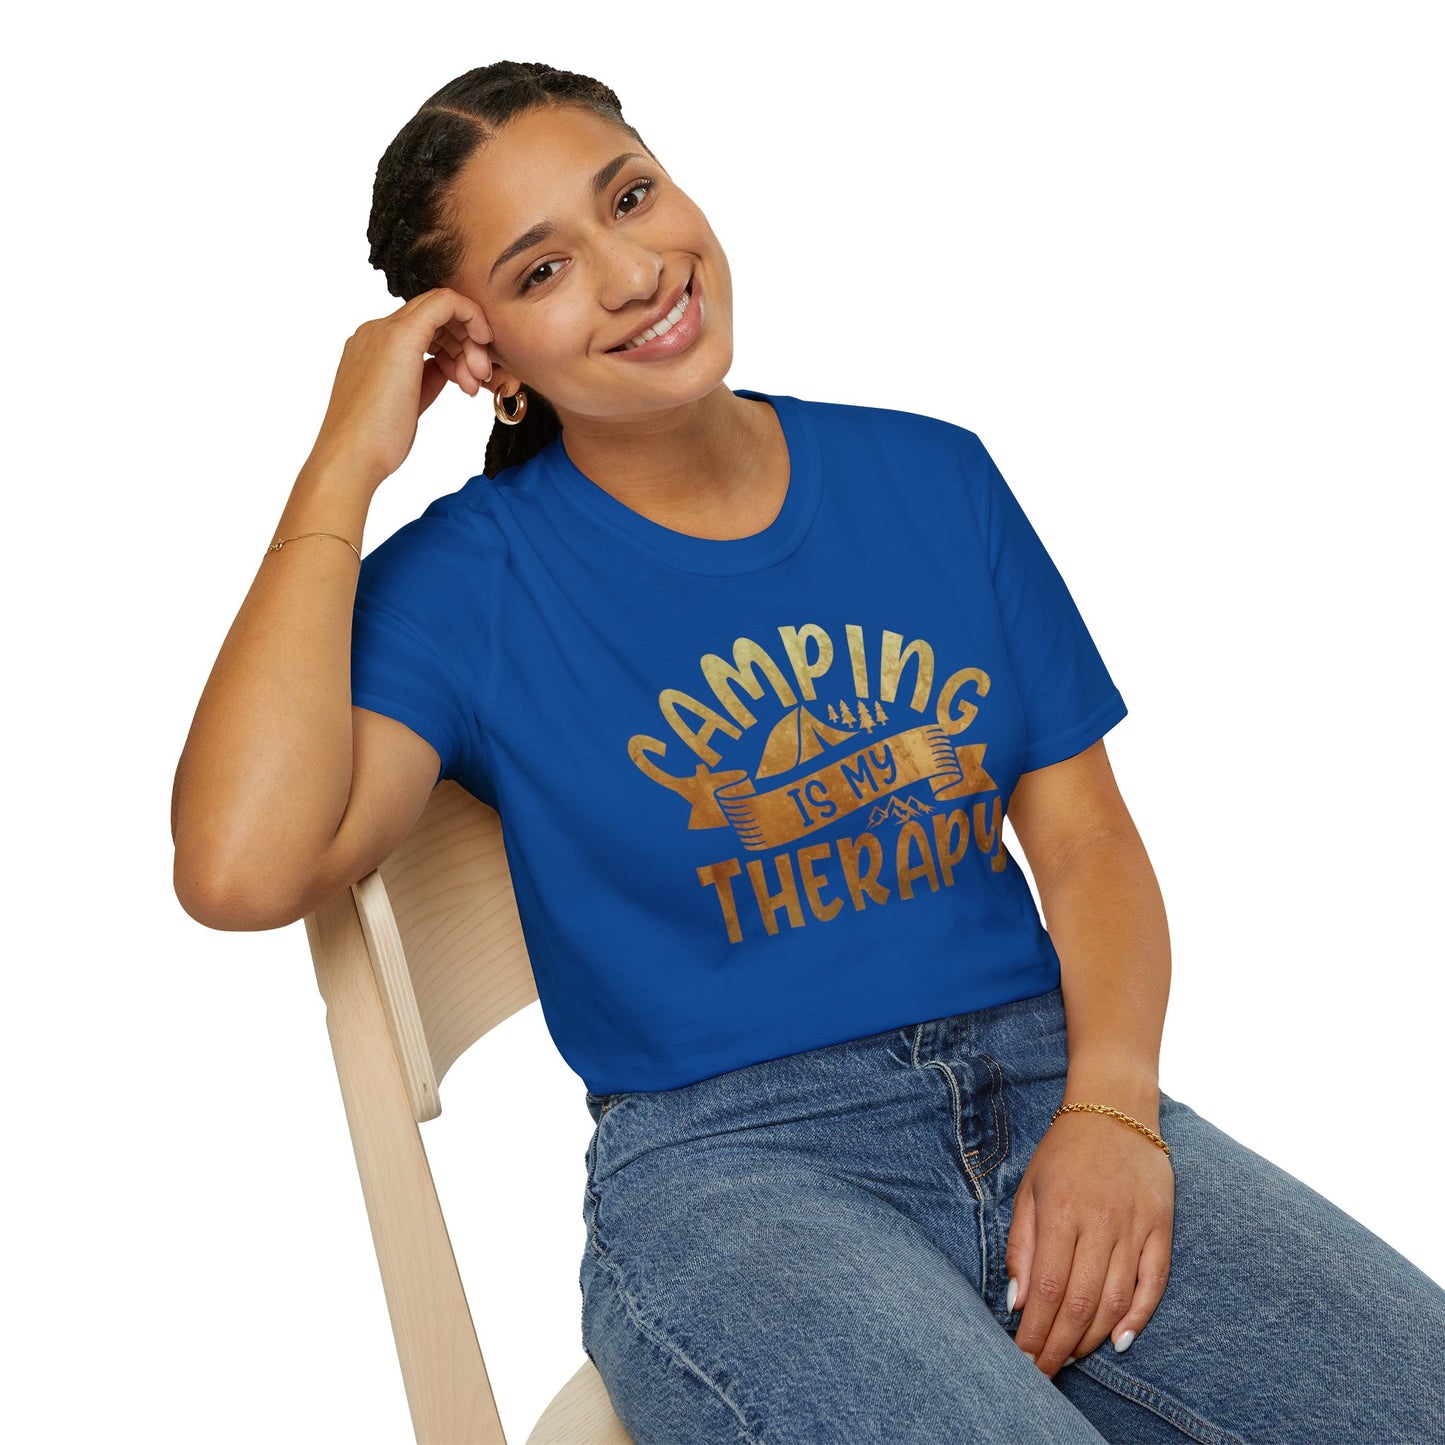 Camping is My Therapy T-Shirt: Explore the Outdoors in Style with this Comfortable Tee!